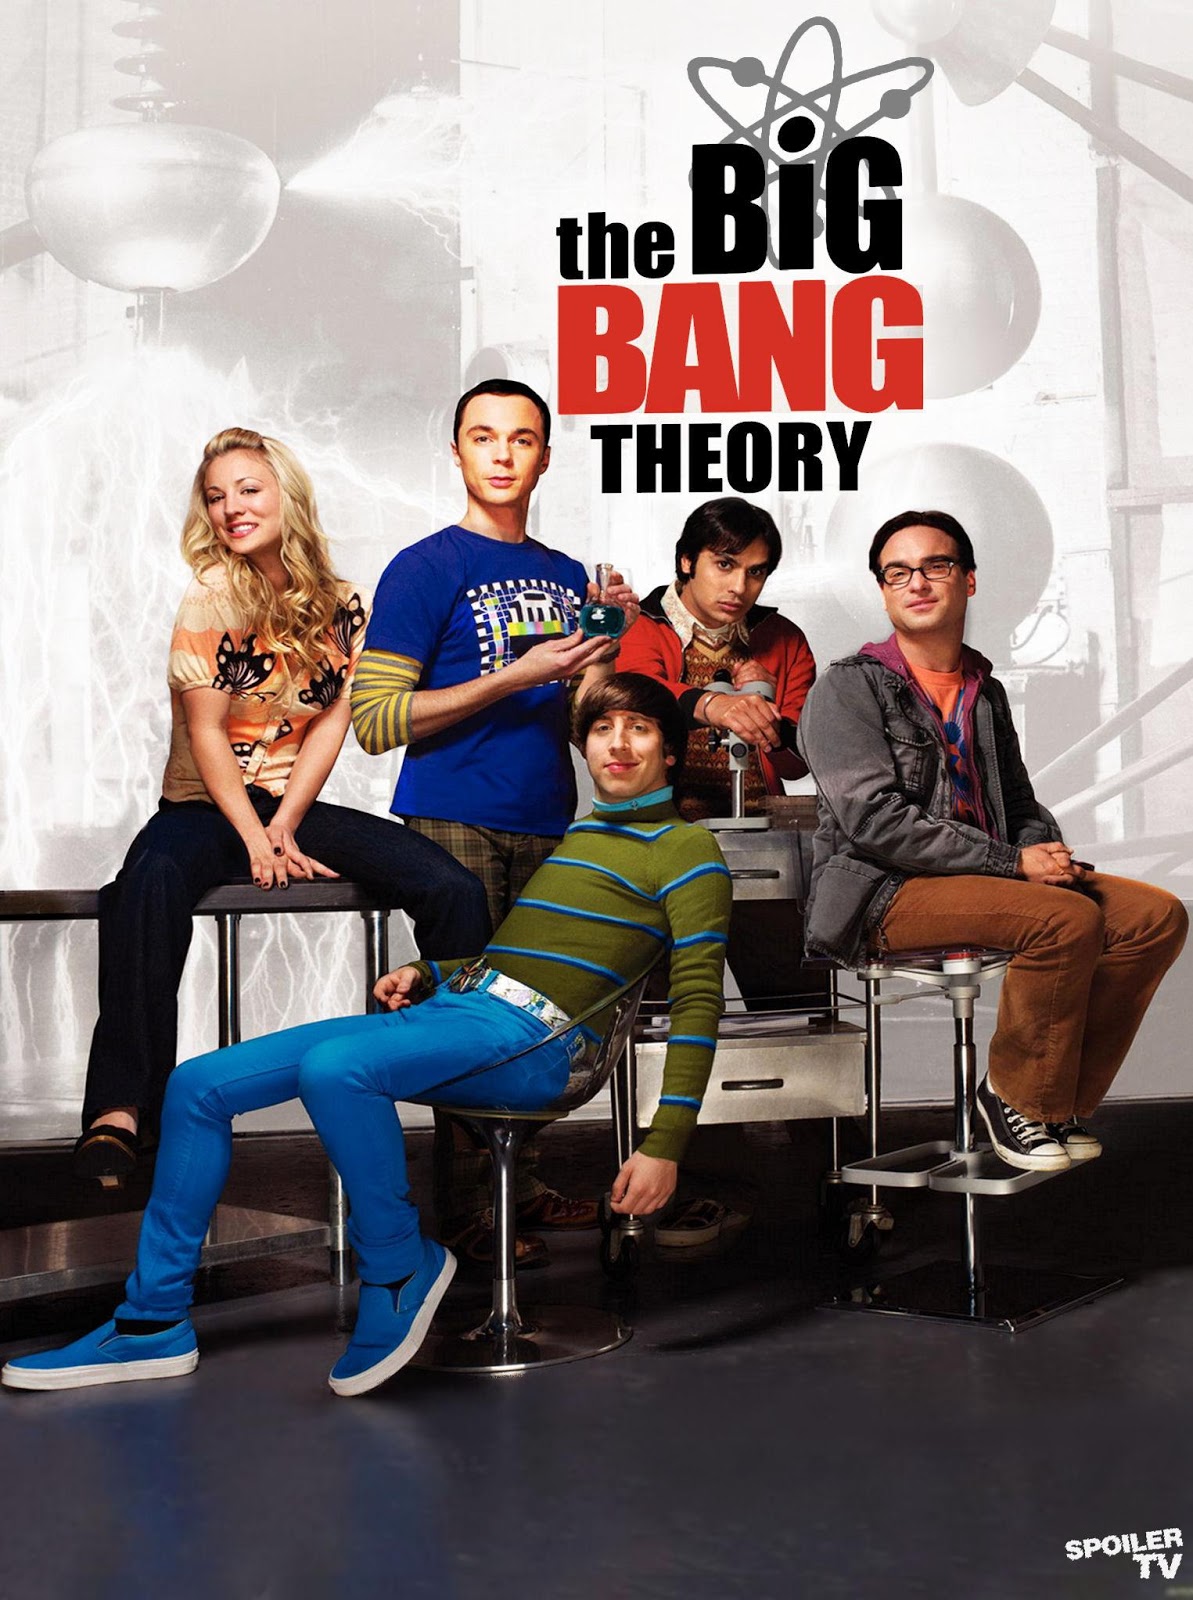 The Big Bang Theory Poster Gallery1 | Tv Series Posters and Cast